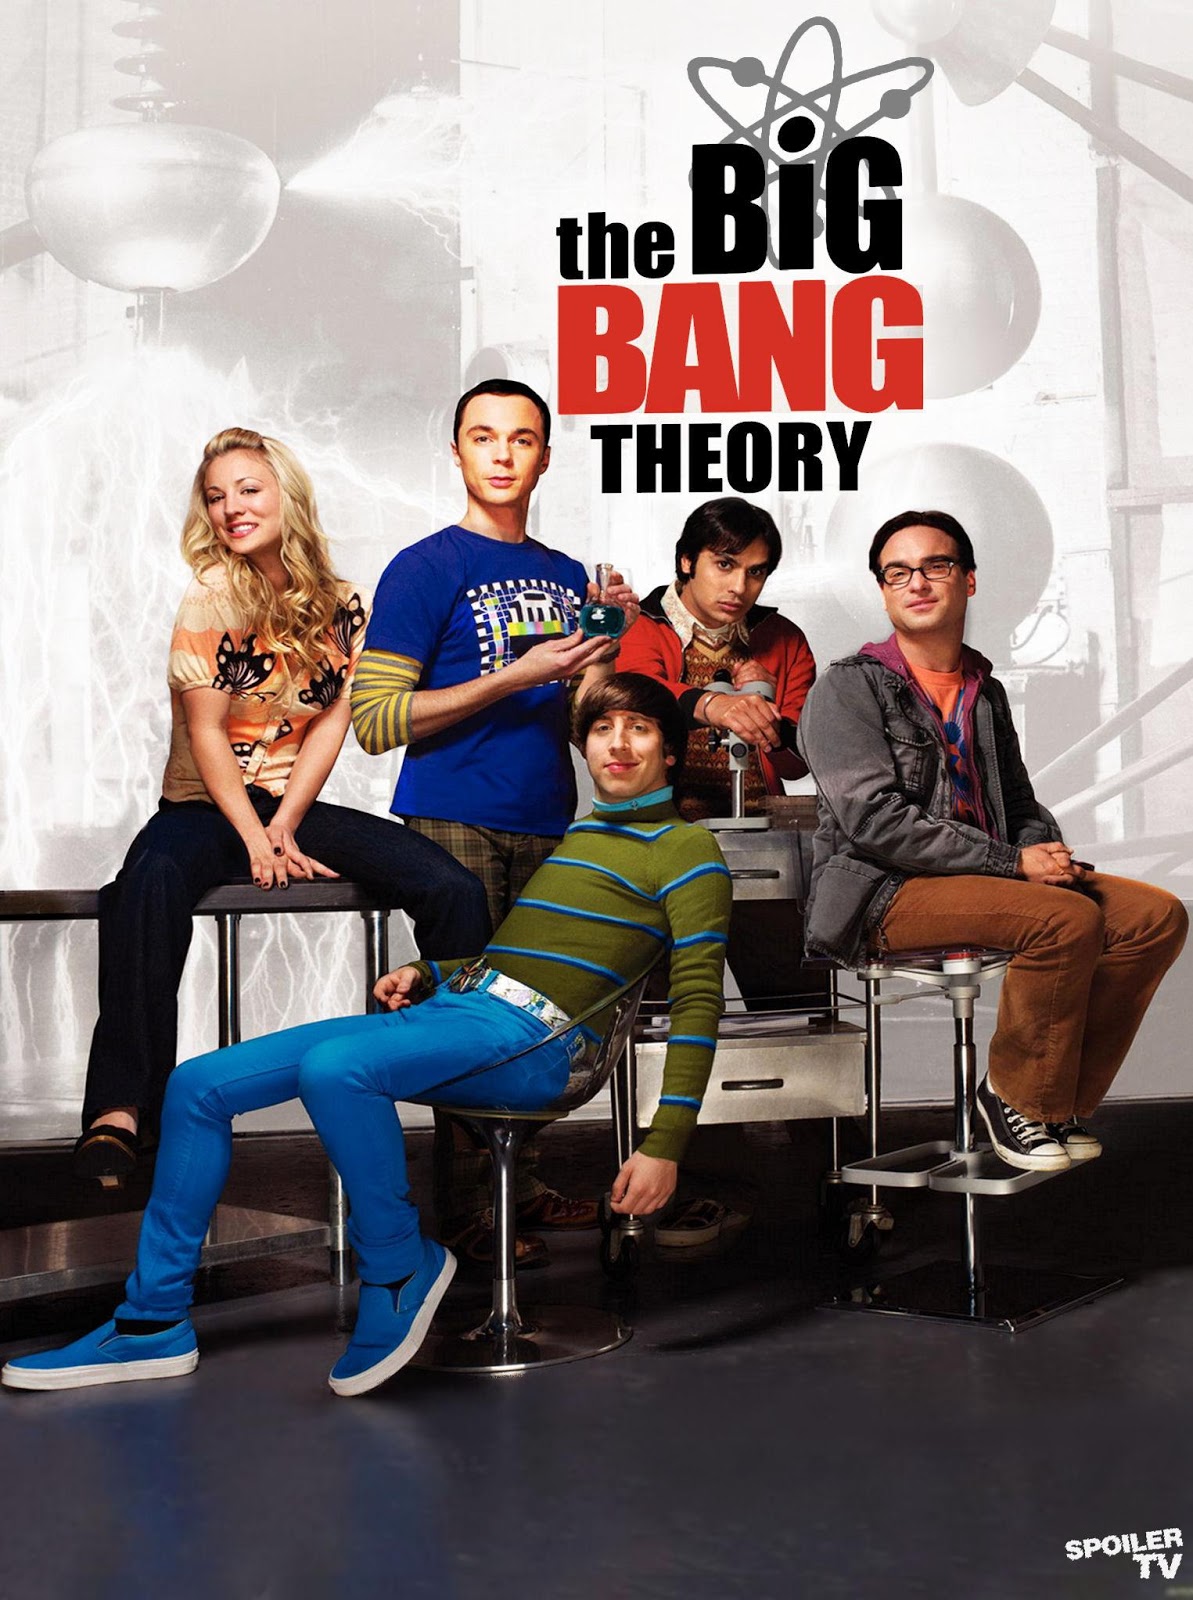 The Big Bang Theory Poster Gallery1 | Tv Series Posters and Cast